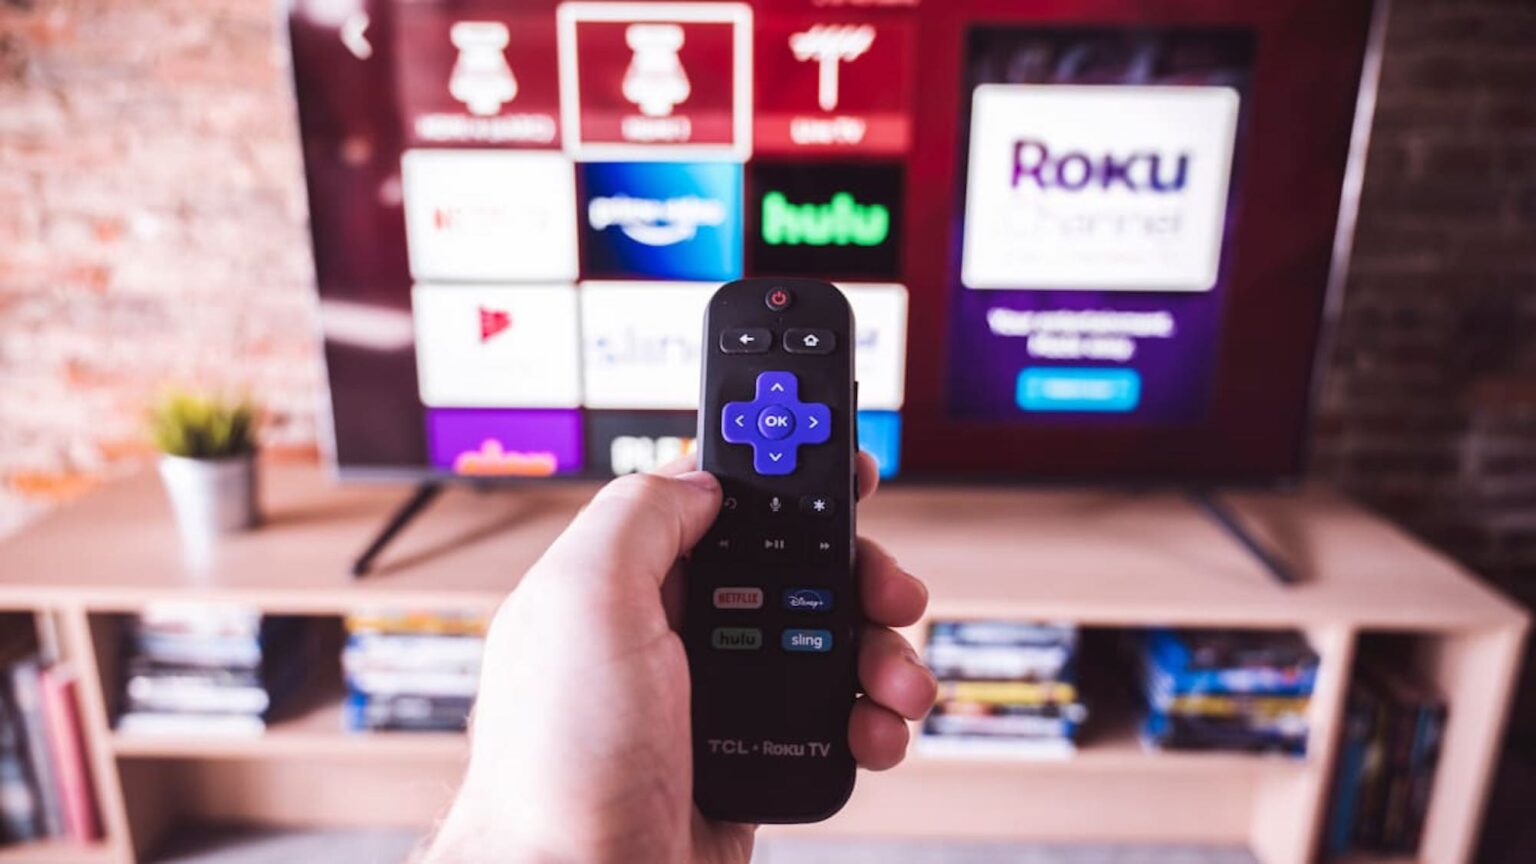 After fighting tooth and nail to quietly remain on Roku, porn companies like PornHub and more will finally be removed from the streaming platform.